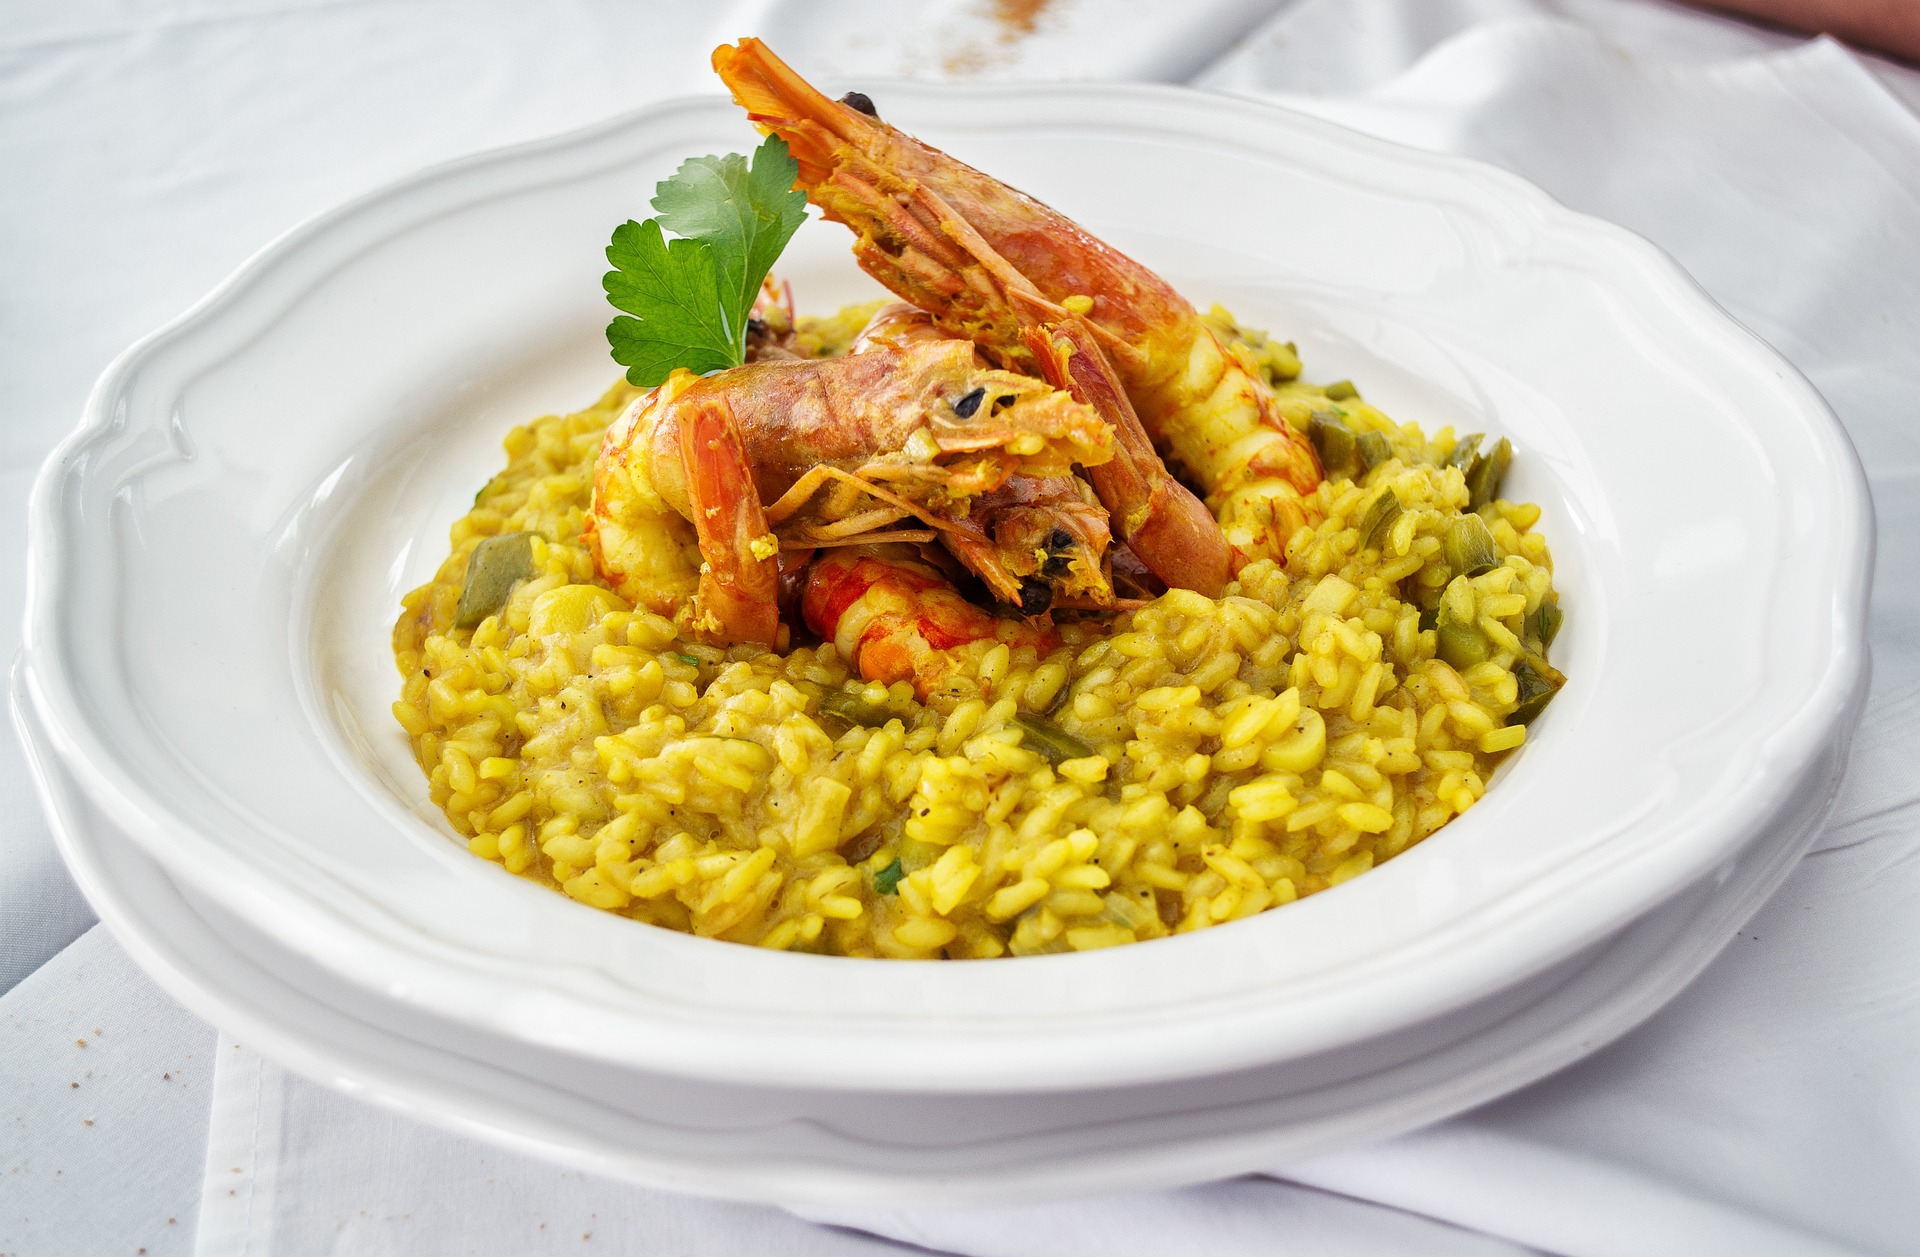 Seafood risotto like that you can find at our insider Park City restaurant picks.